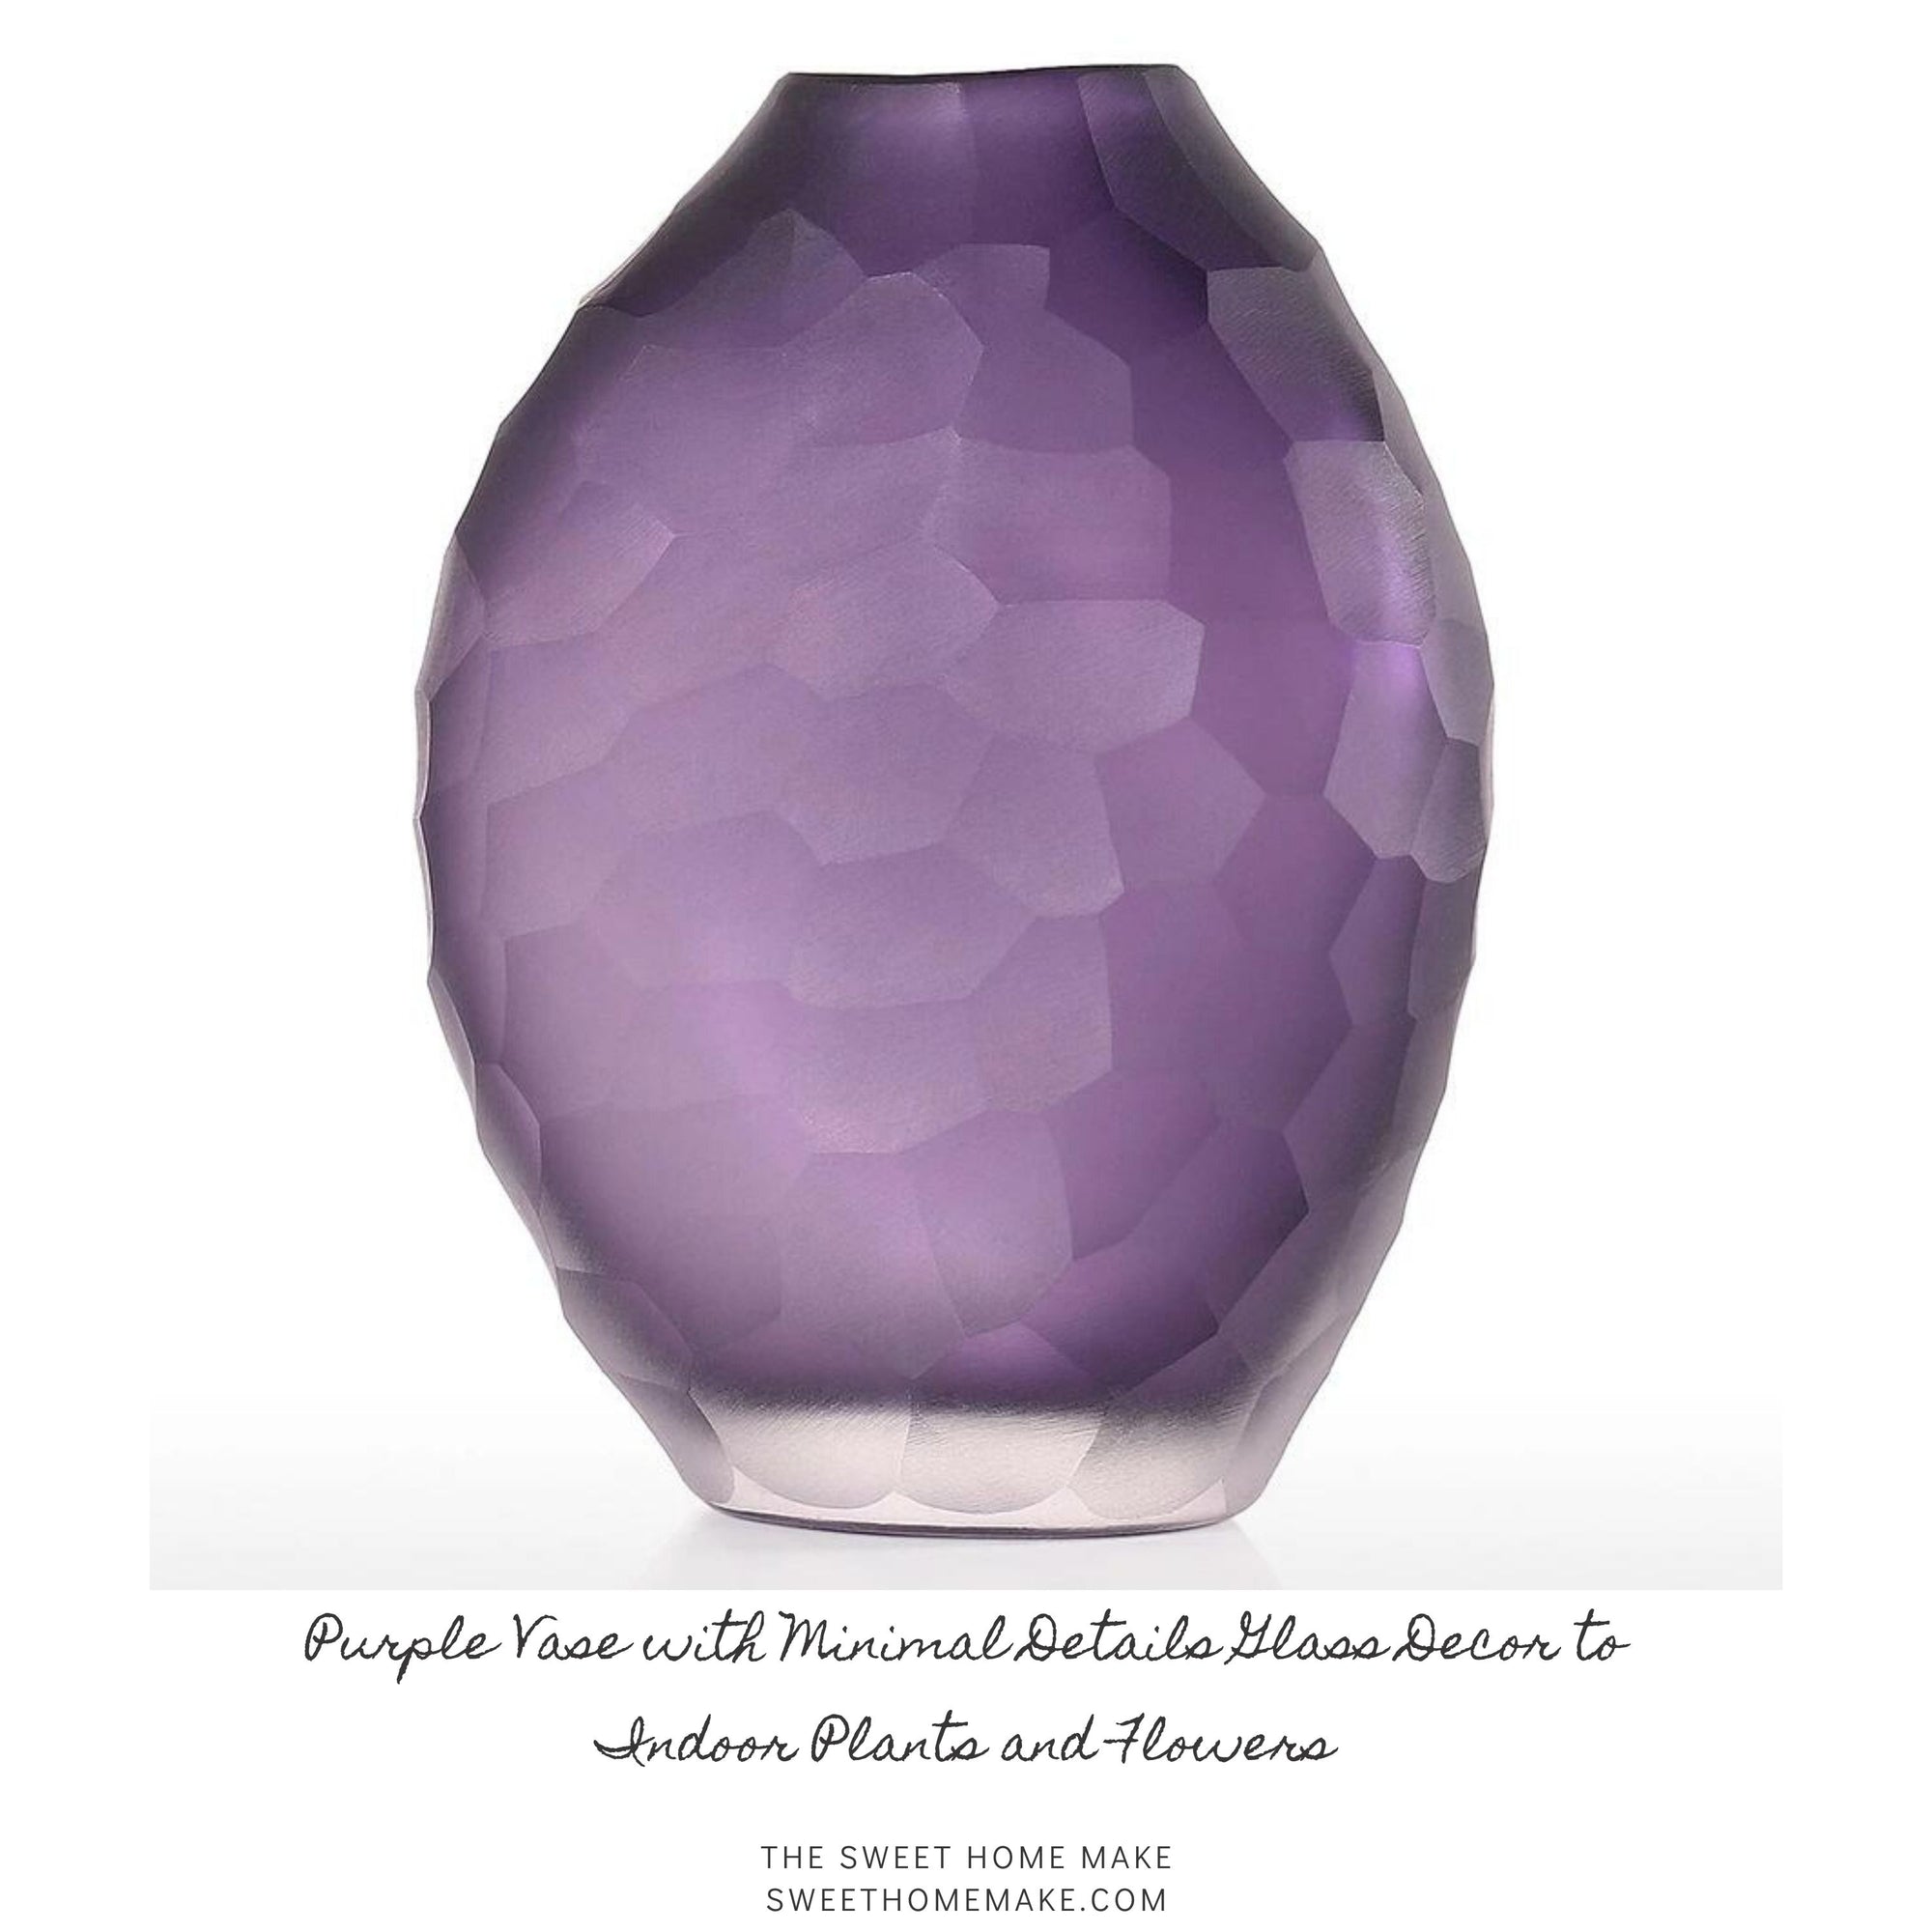 Purple Vase with Minimal Details Glass Decor to Indoor Plants and Flowers